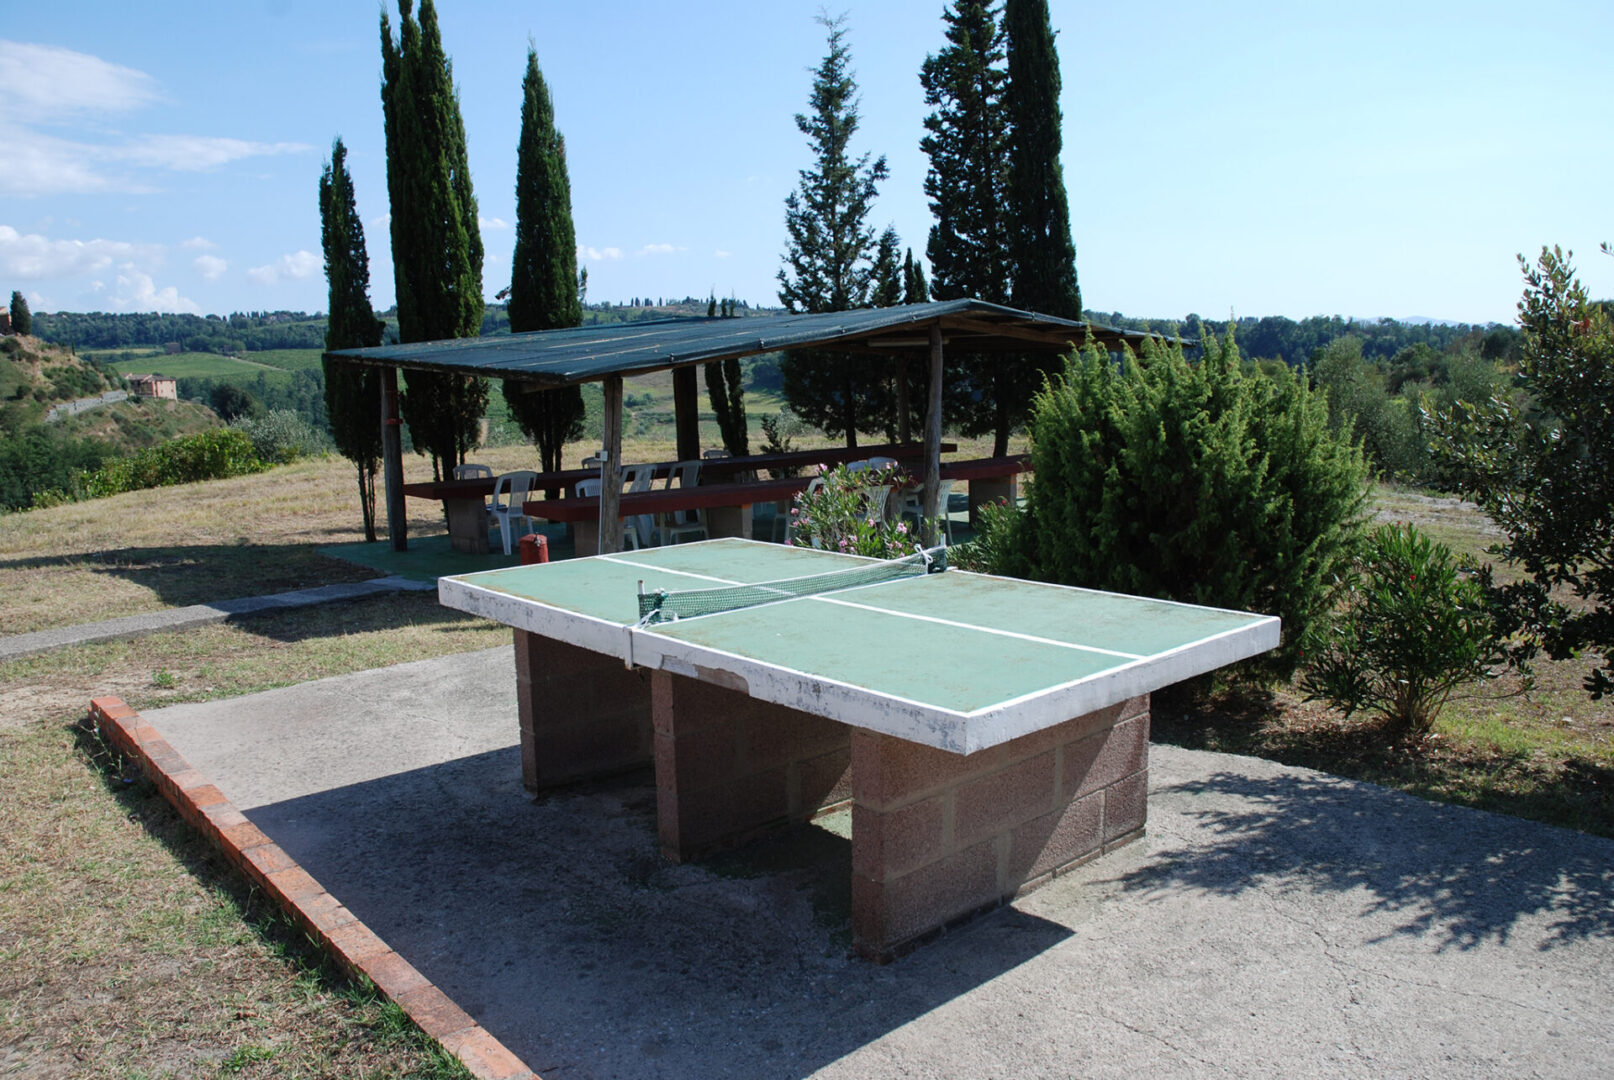 A table tennis table in the middle of an outdoor court.